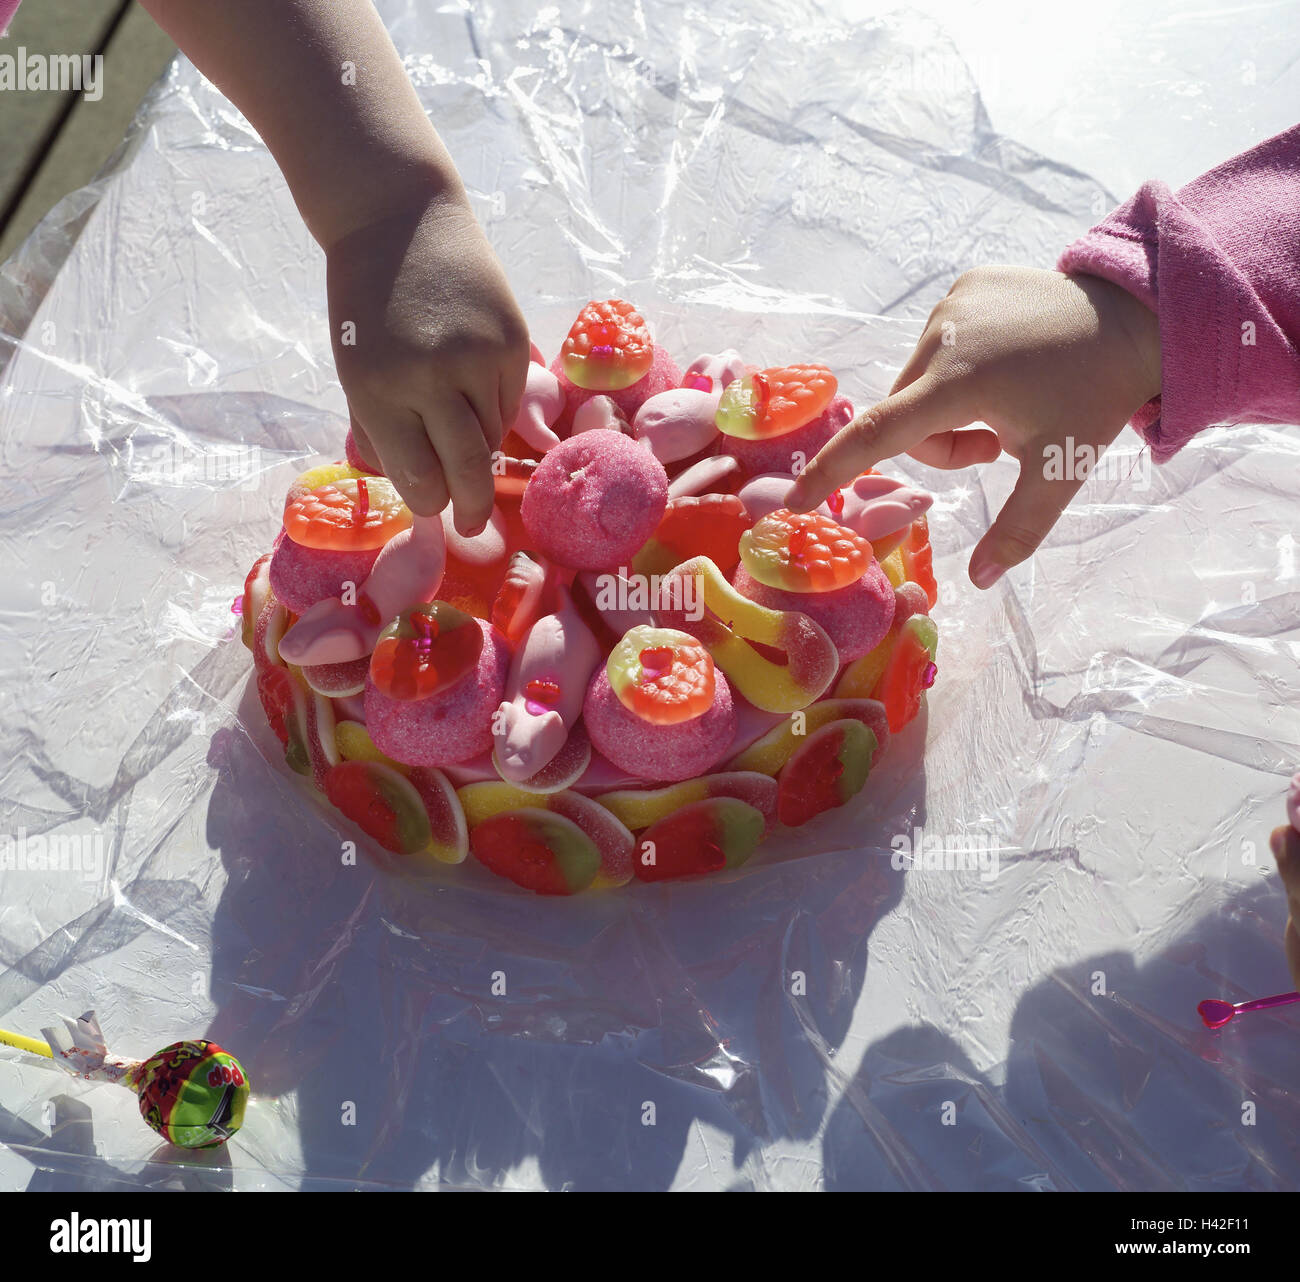 To sweet injustice, child hands, children, detail, hands, curiosity, nibble, cake, sweets, fruit rubber, sweet, sweetly, containing sugar, rich in calorie, calories, nutrition unhealthily, children's birthday party, birthday party, product photography, re Stock Photo